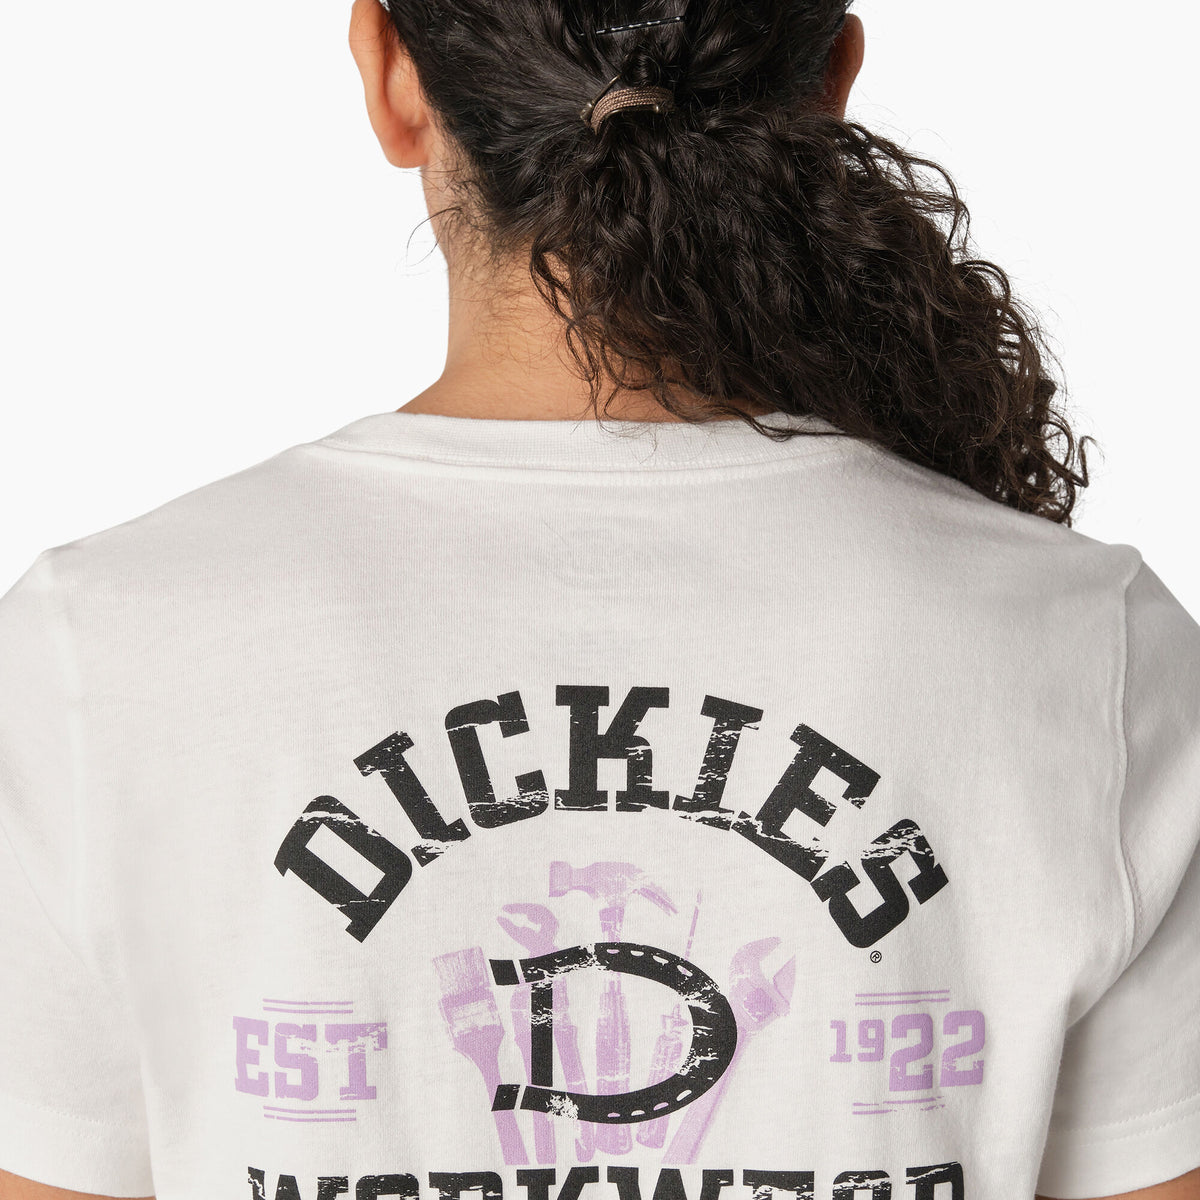 Dickies (W) Workwear Graphic SS T-Shirt - Work World - Workwear, Work Boots, Safety Gear